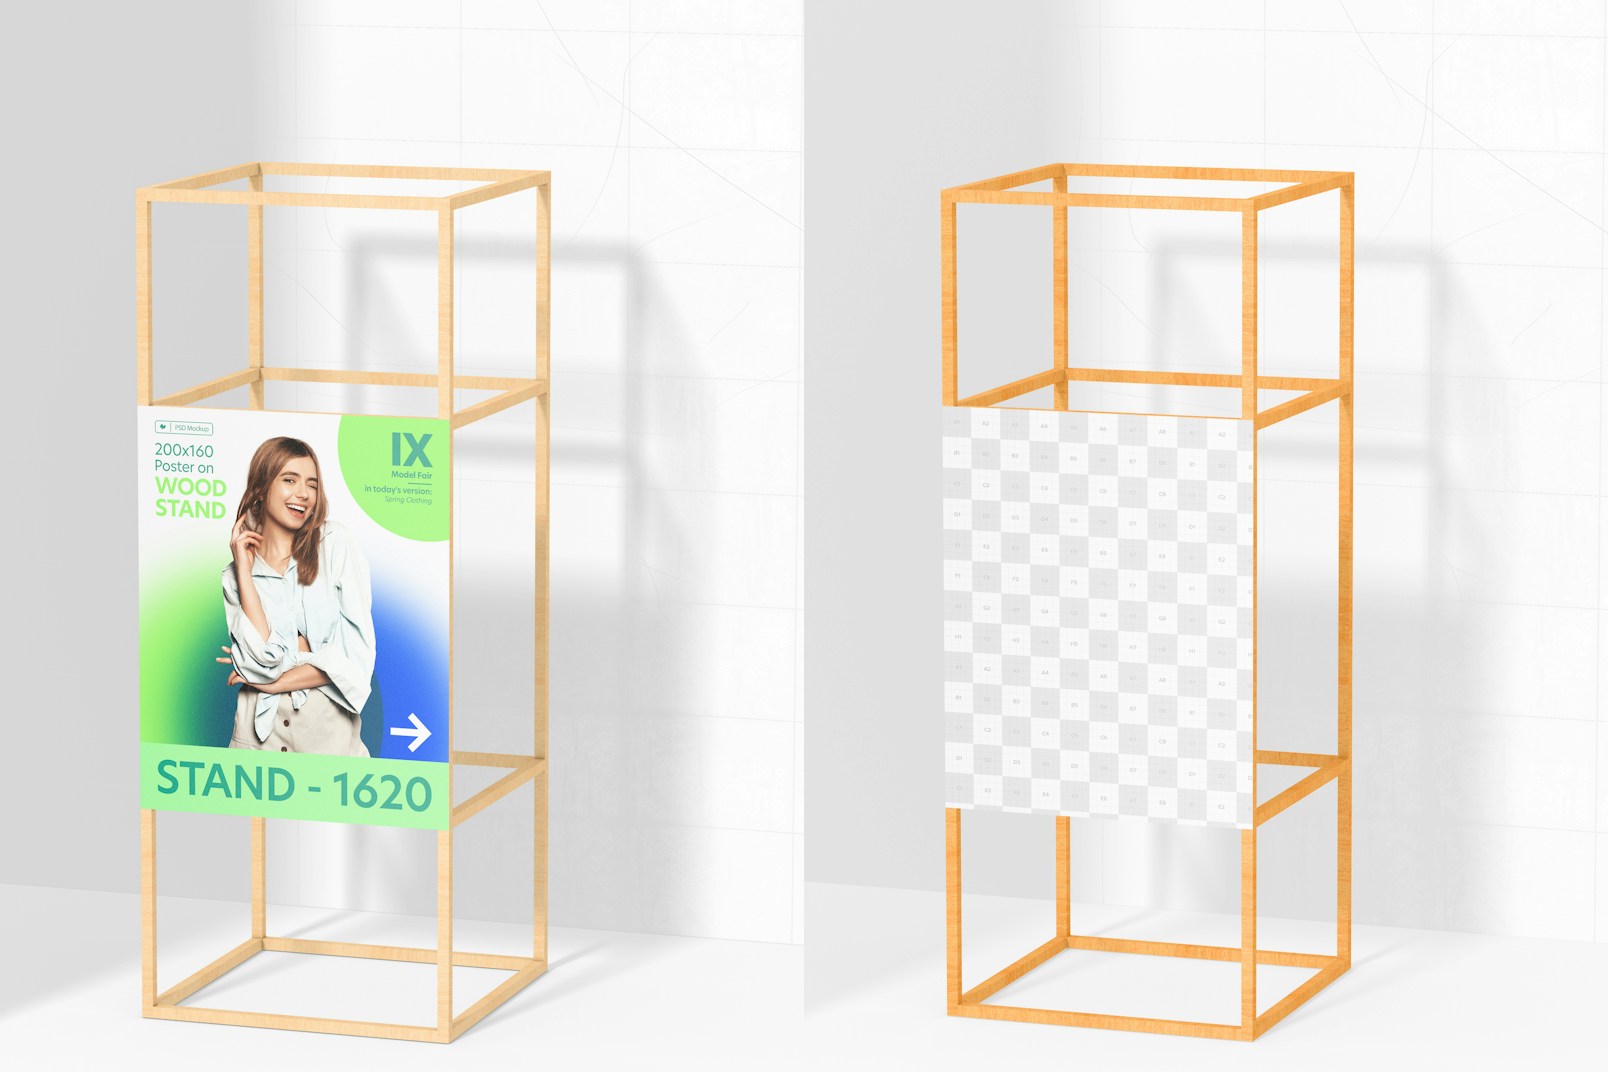 200x160 Poster on Wood Stand Mockup, Left View